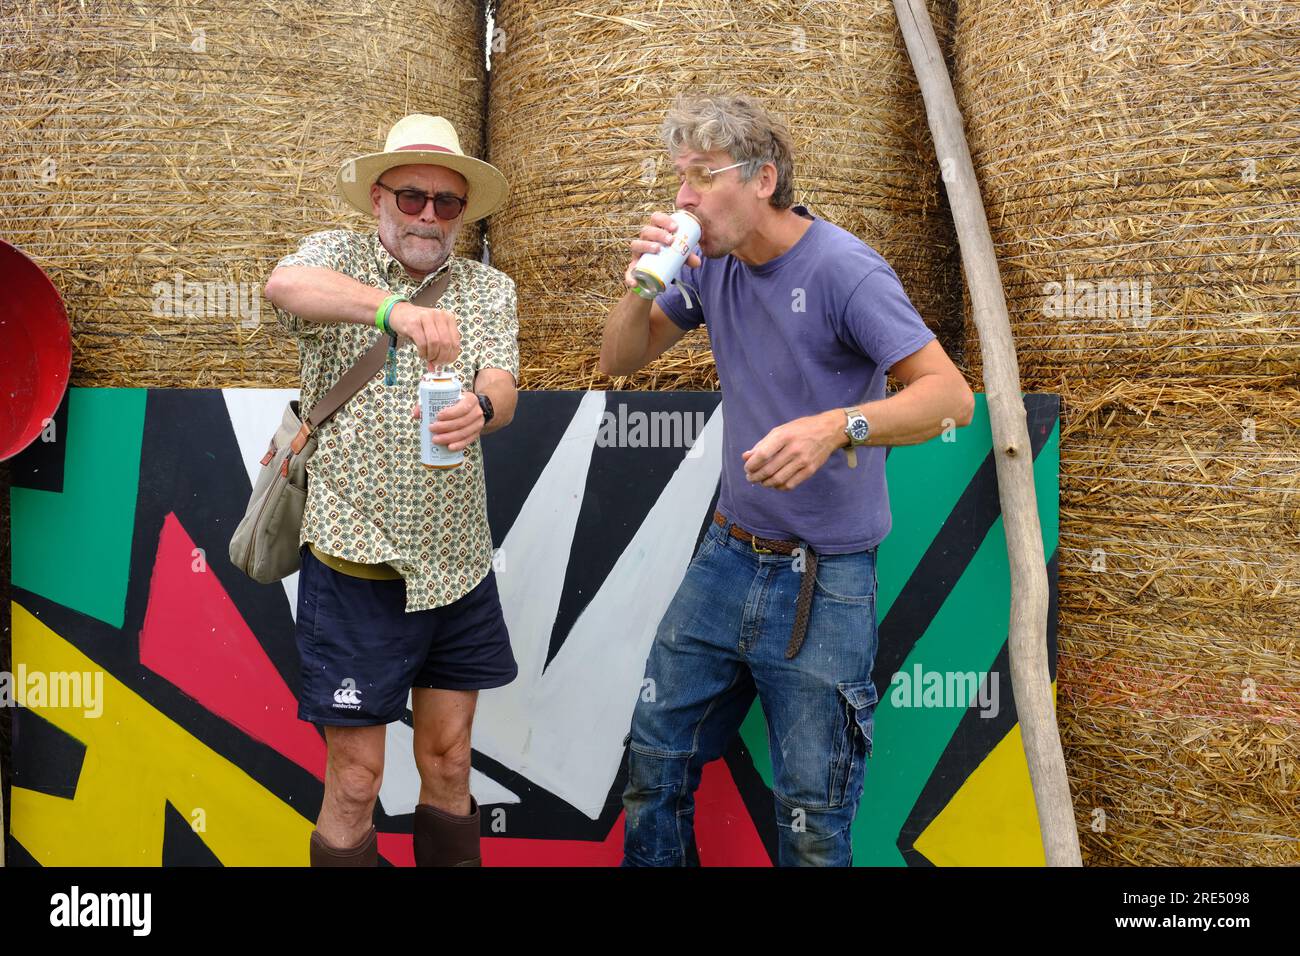 Two men at a festival drinking beer. Stock Photo